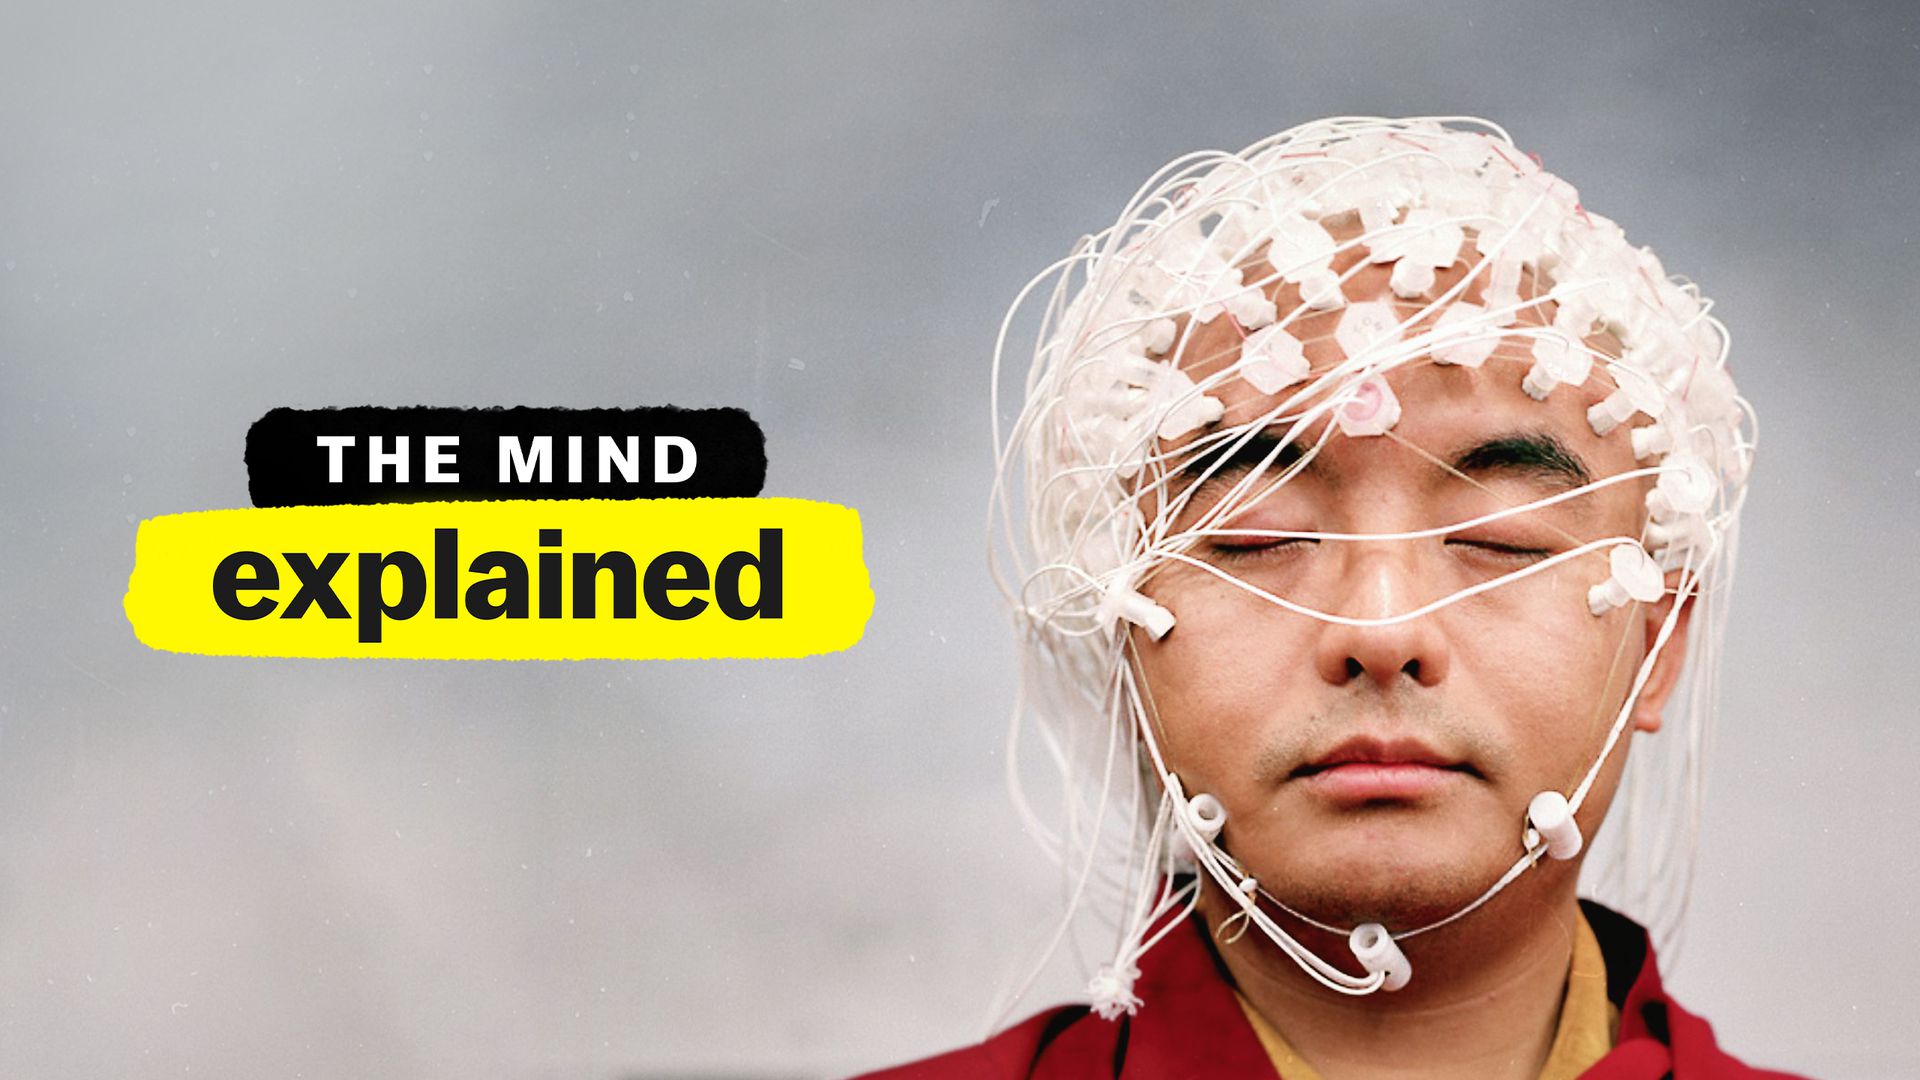 Geek insider, geekinsider, geekinsider. Com,, the mind, explained: the tripping brain, entertainment